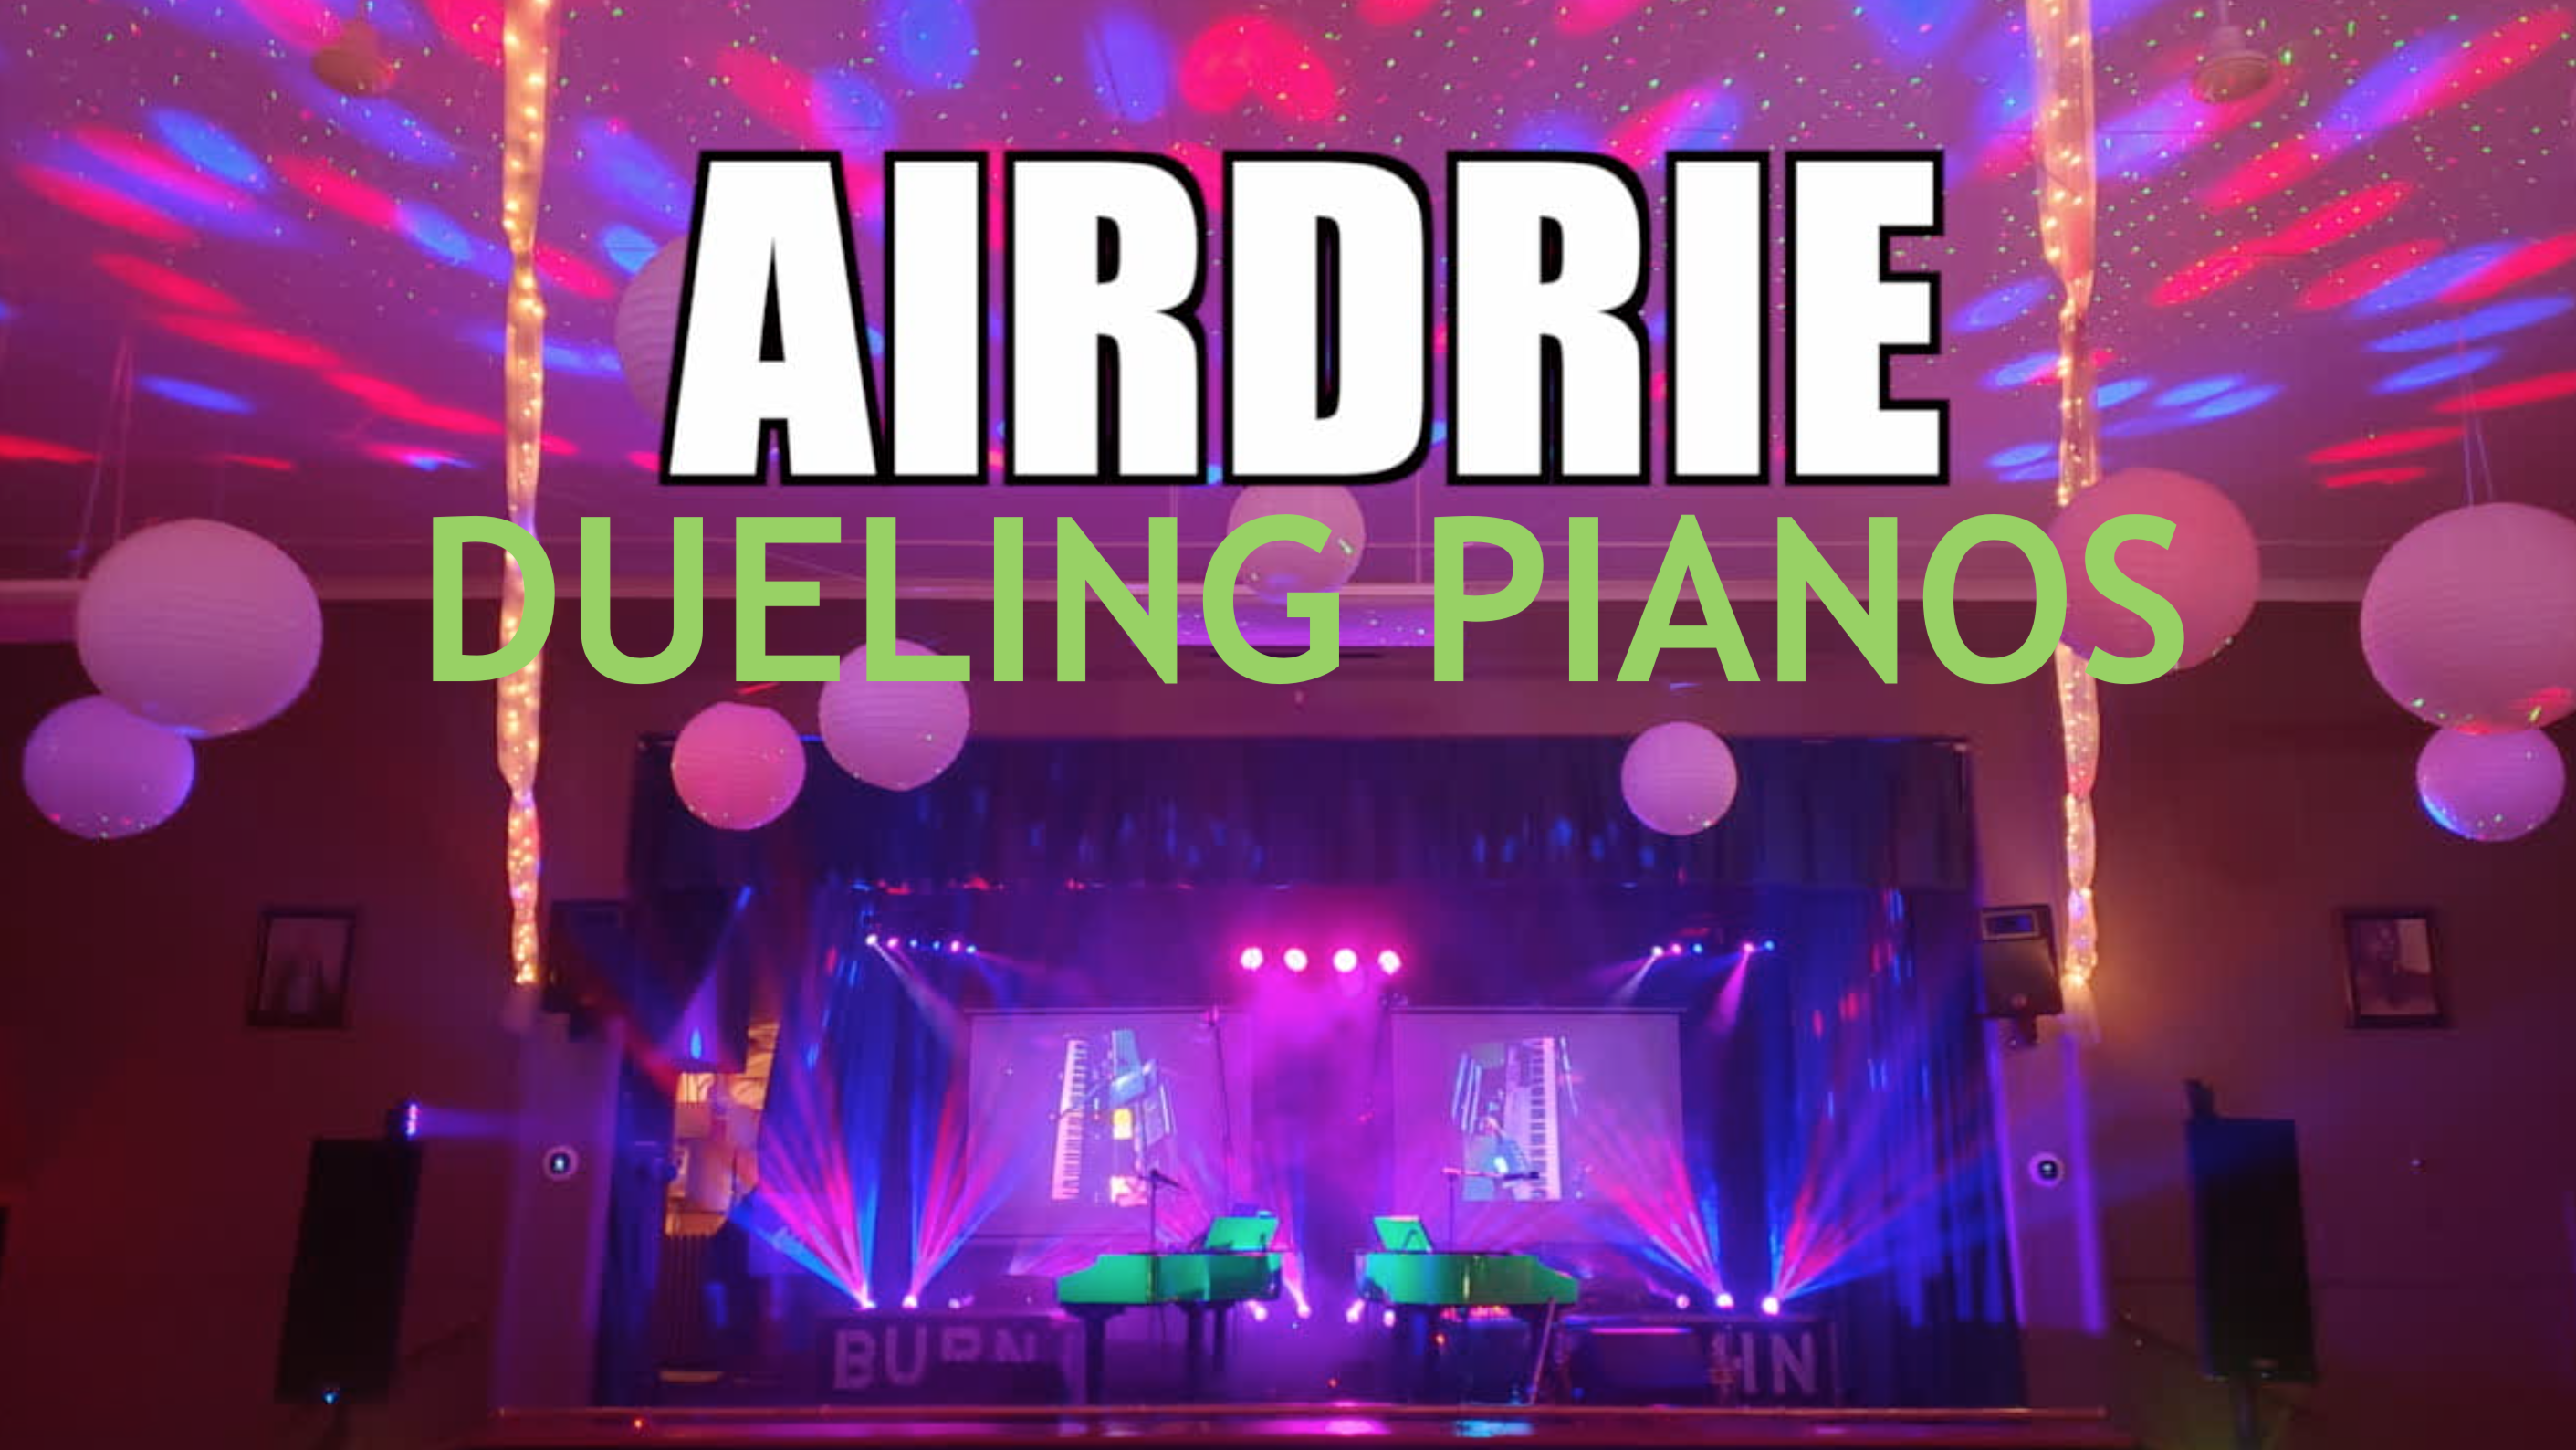 Airdrie Dueling Pianos Extreme- Apple Creek Golf Course